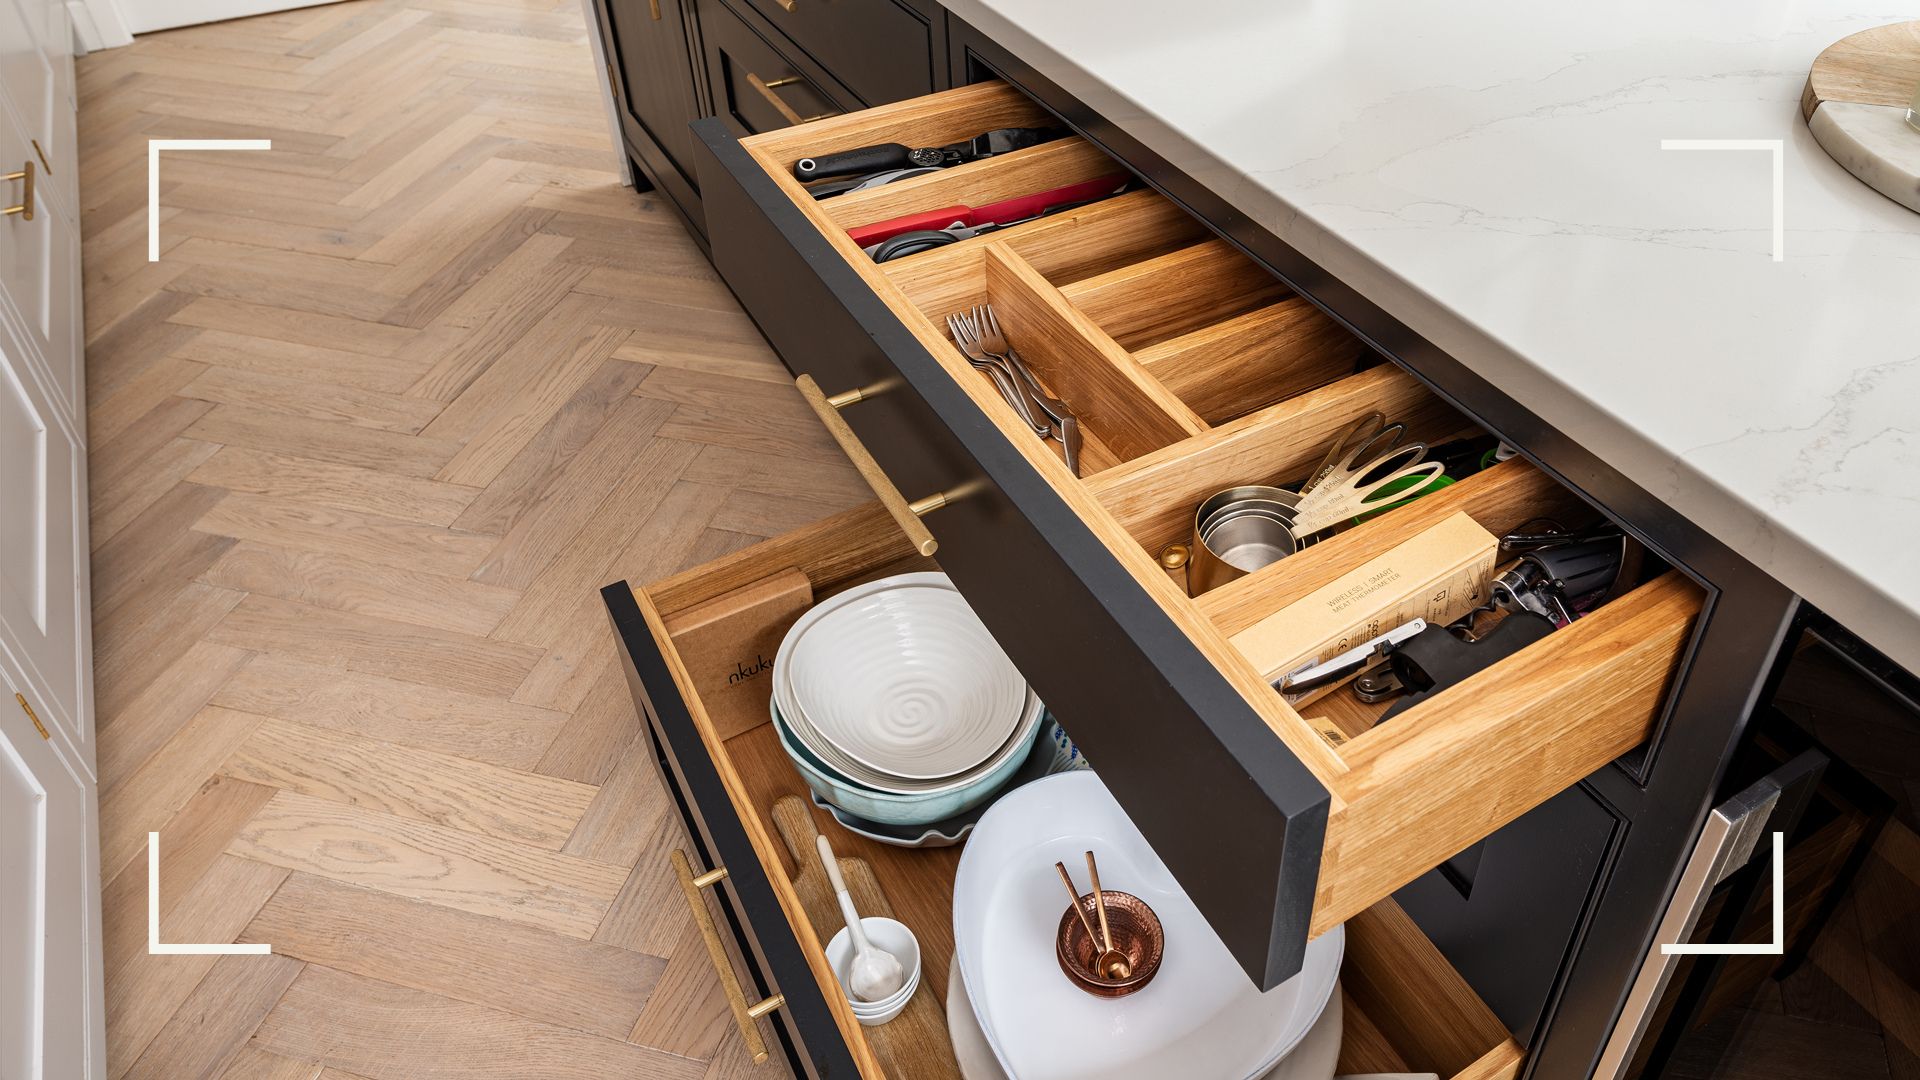 Drawer dividers . . . the key to keeping your tupperware NEAT